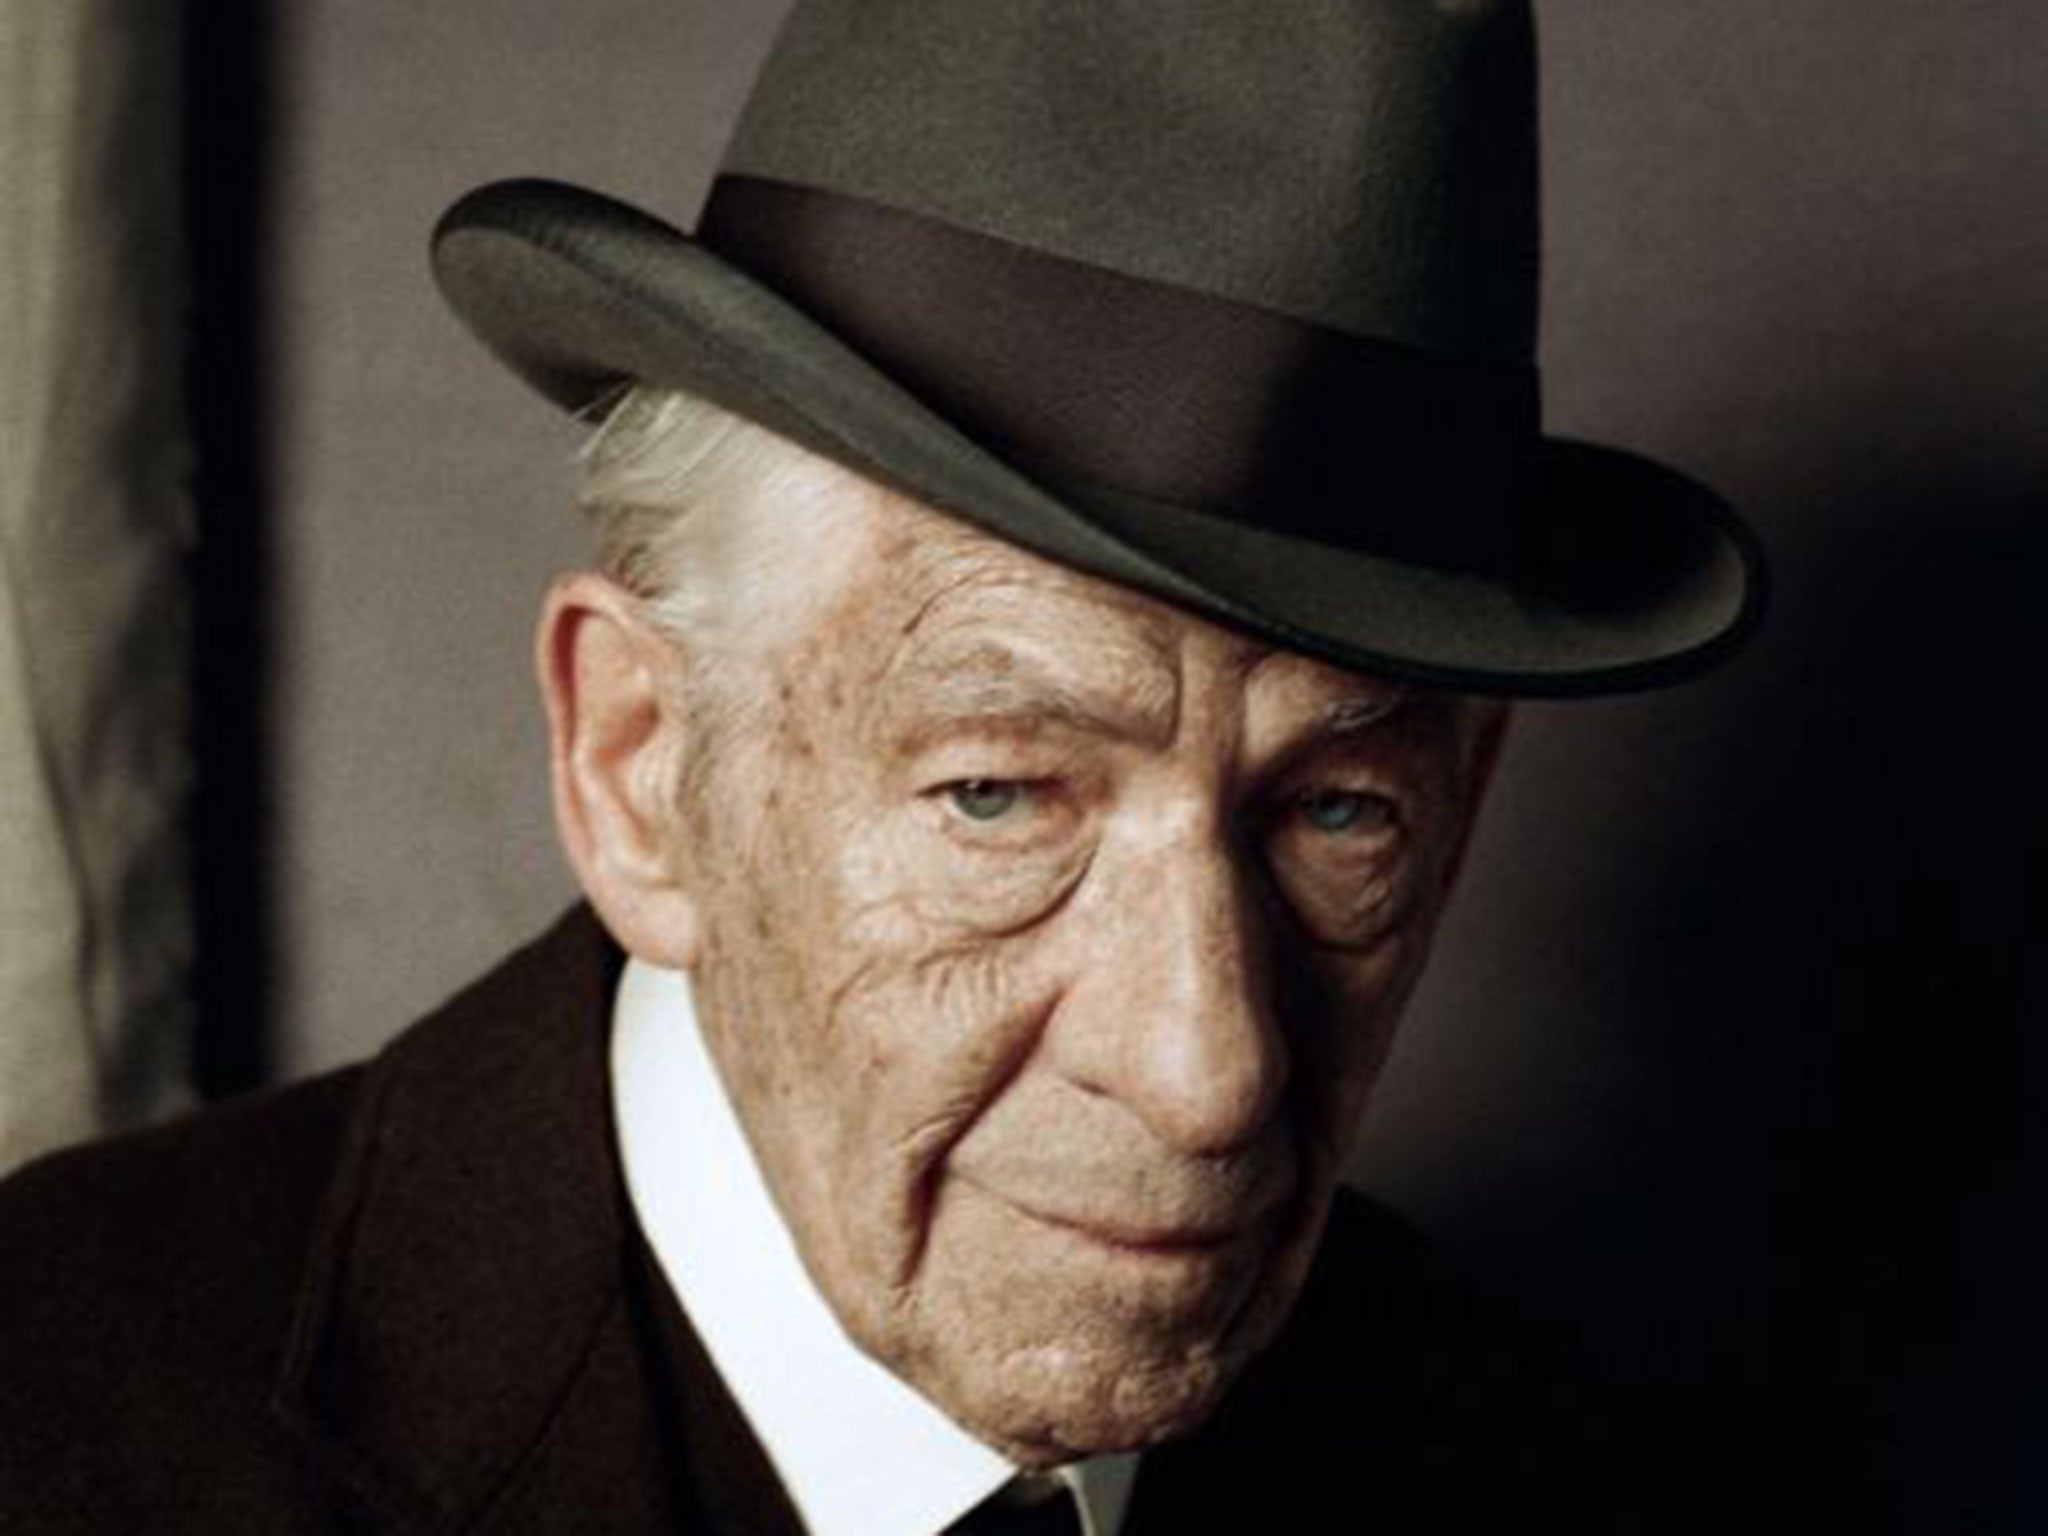 Sir Ian McKellen was one of the founders of Stonewall, set up in 1989, in reaction to Section 28